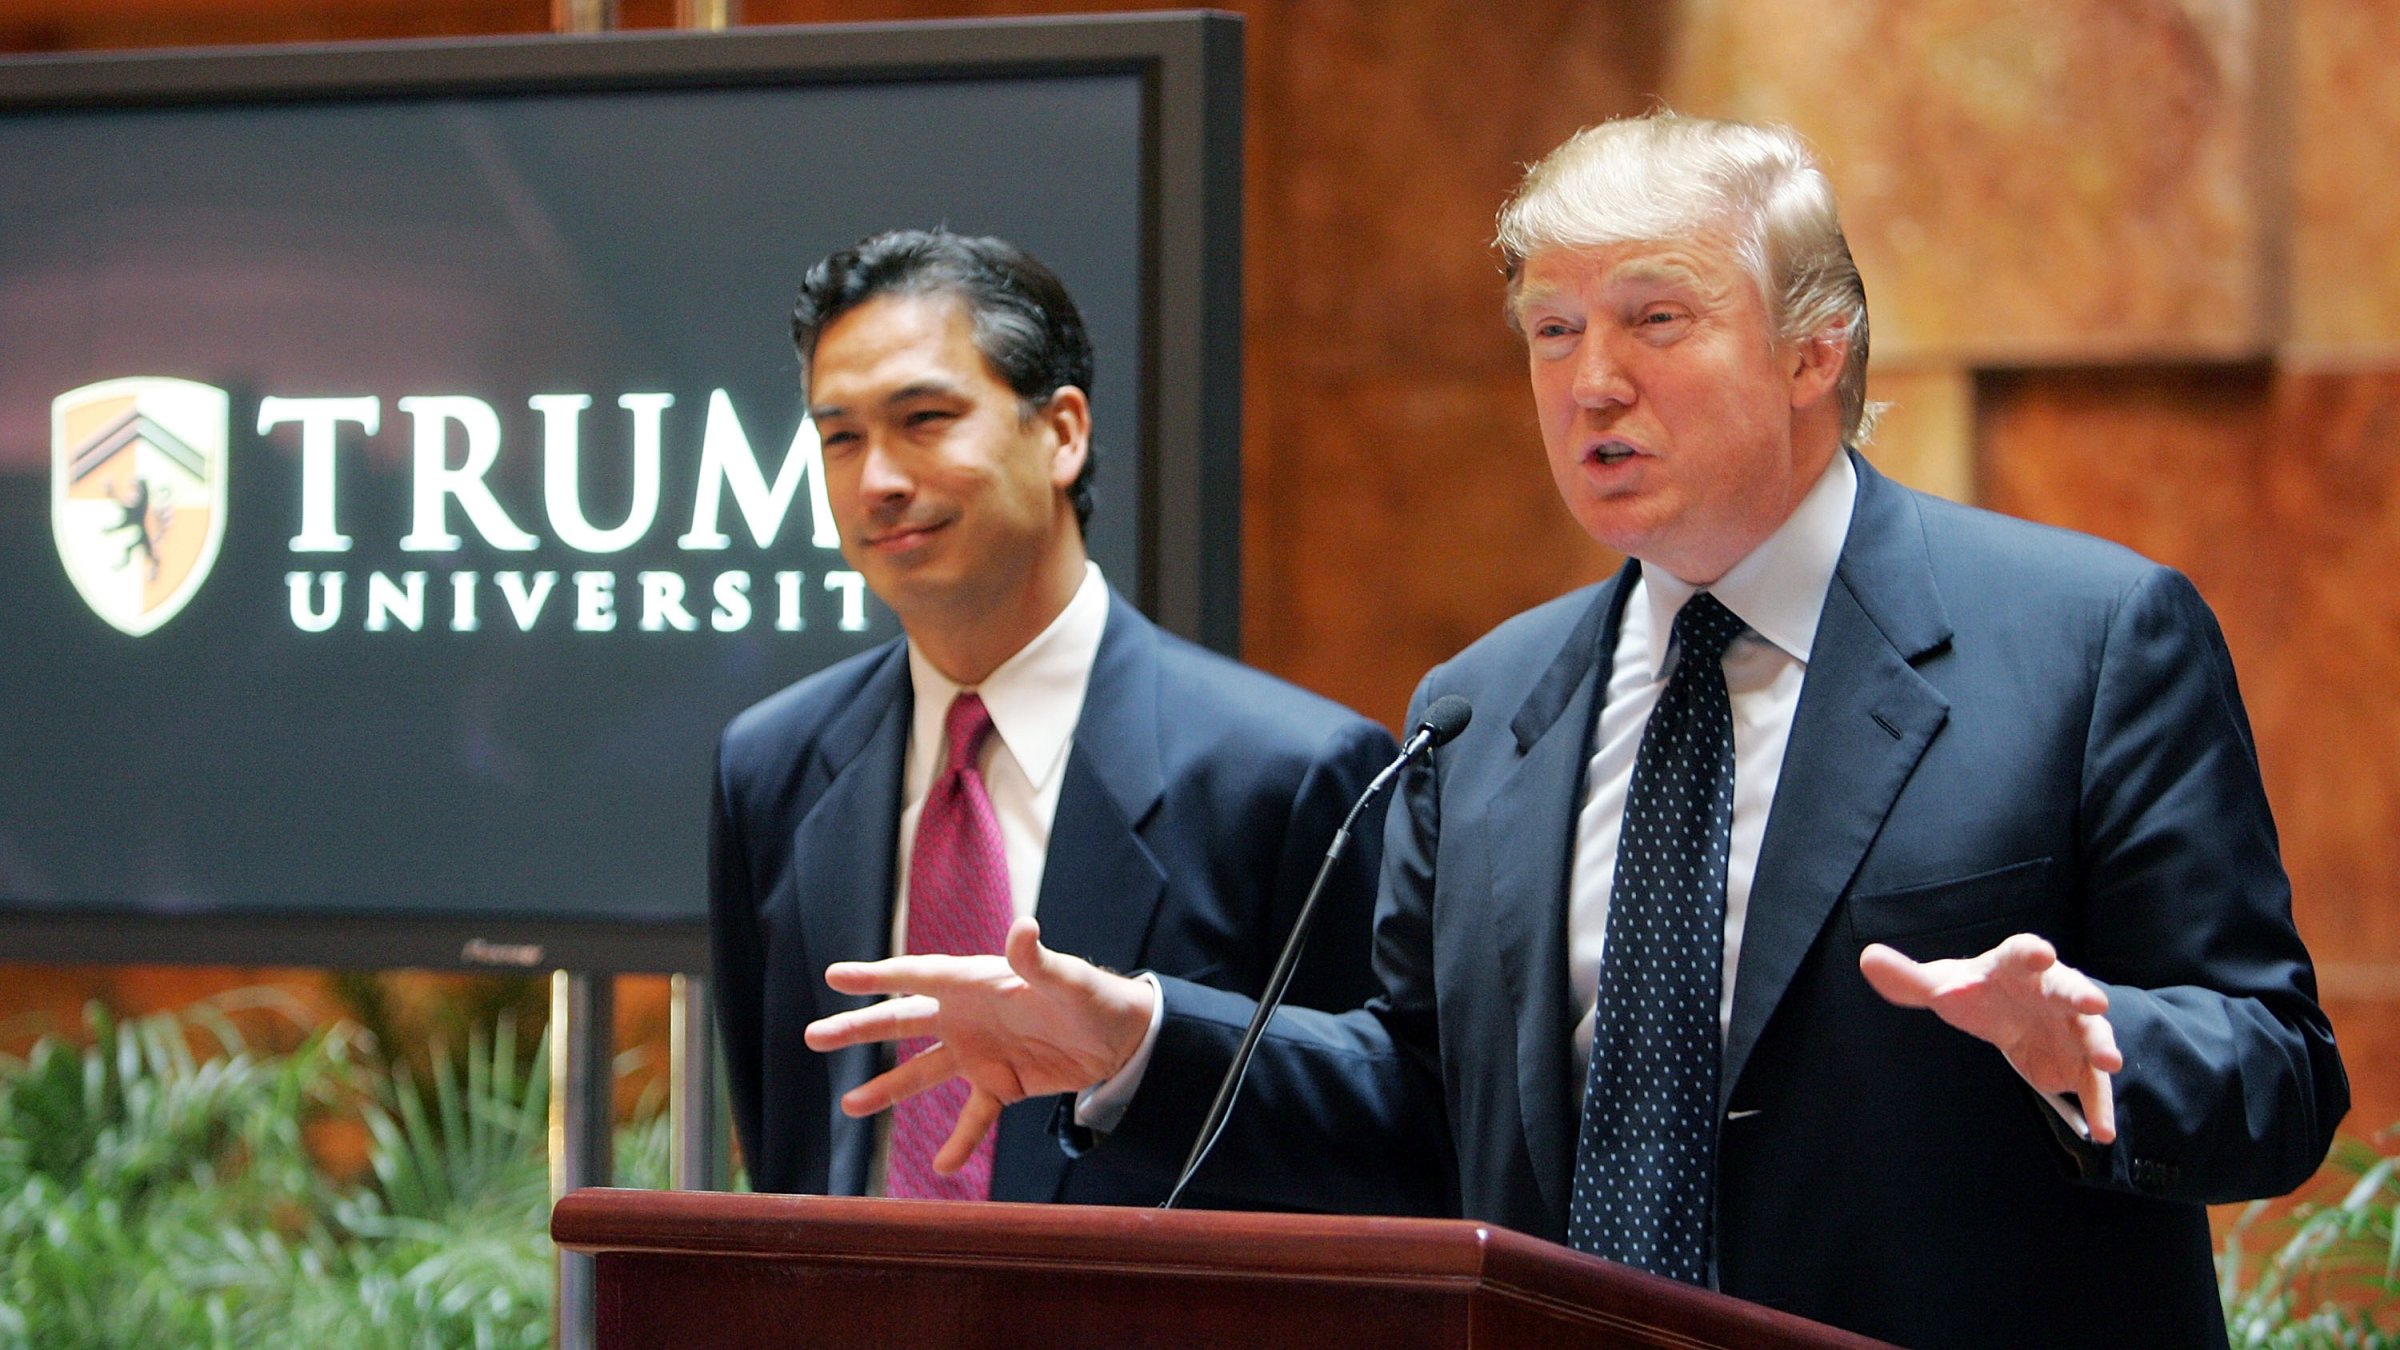 Donald Trump (R) speaks as university president Michael Sexton (L) looks on during a news conference announcing the establishment of Trump University May 23, 2005 in New York City.